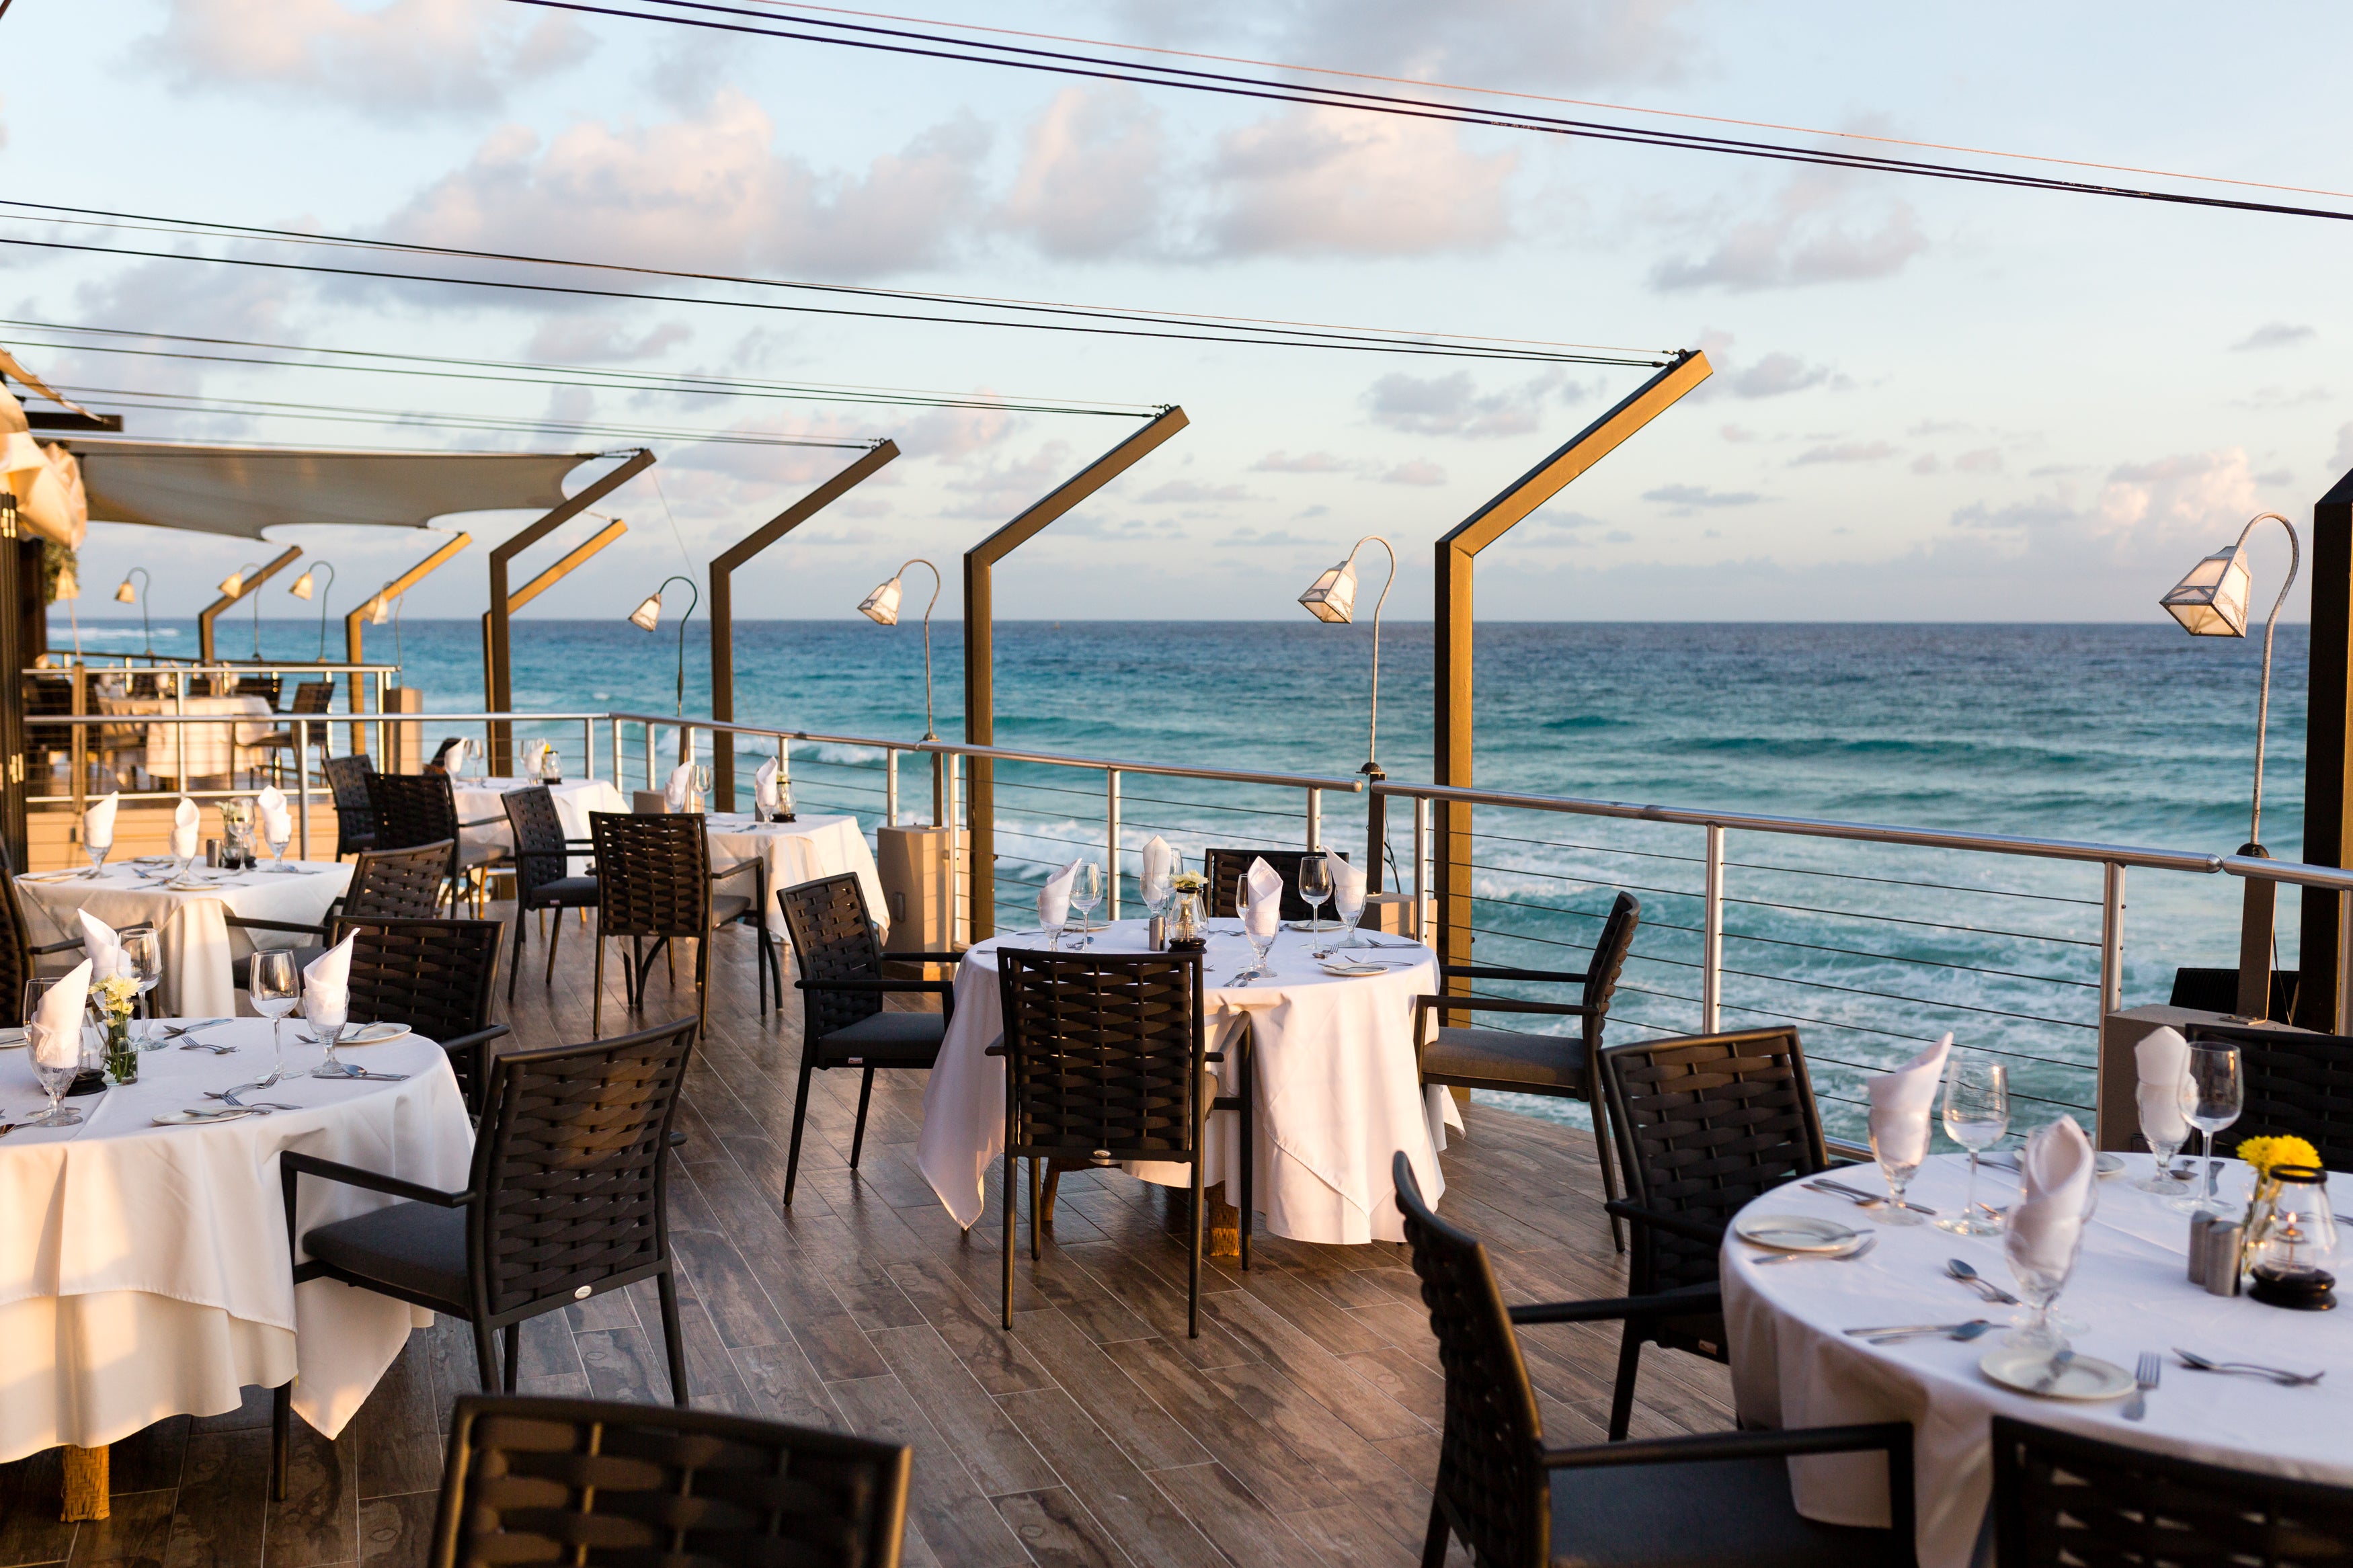 Enjoy a meal with a view at stylish seaside restaurant Champers